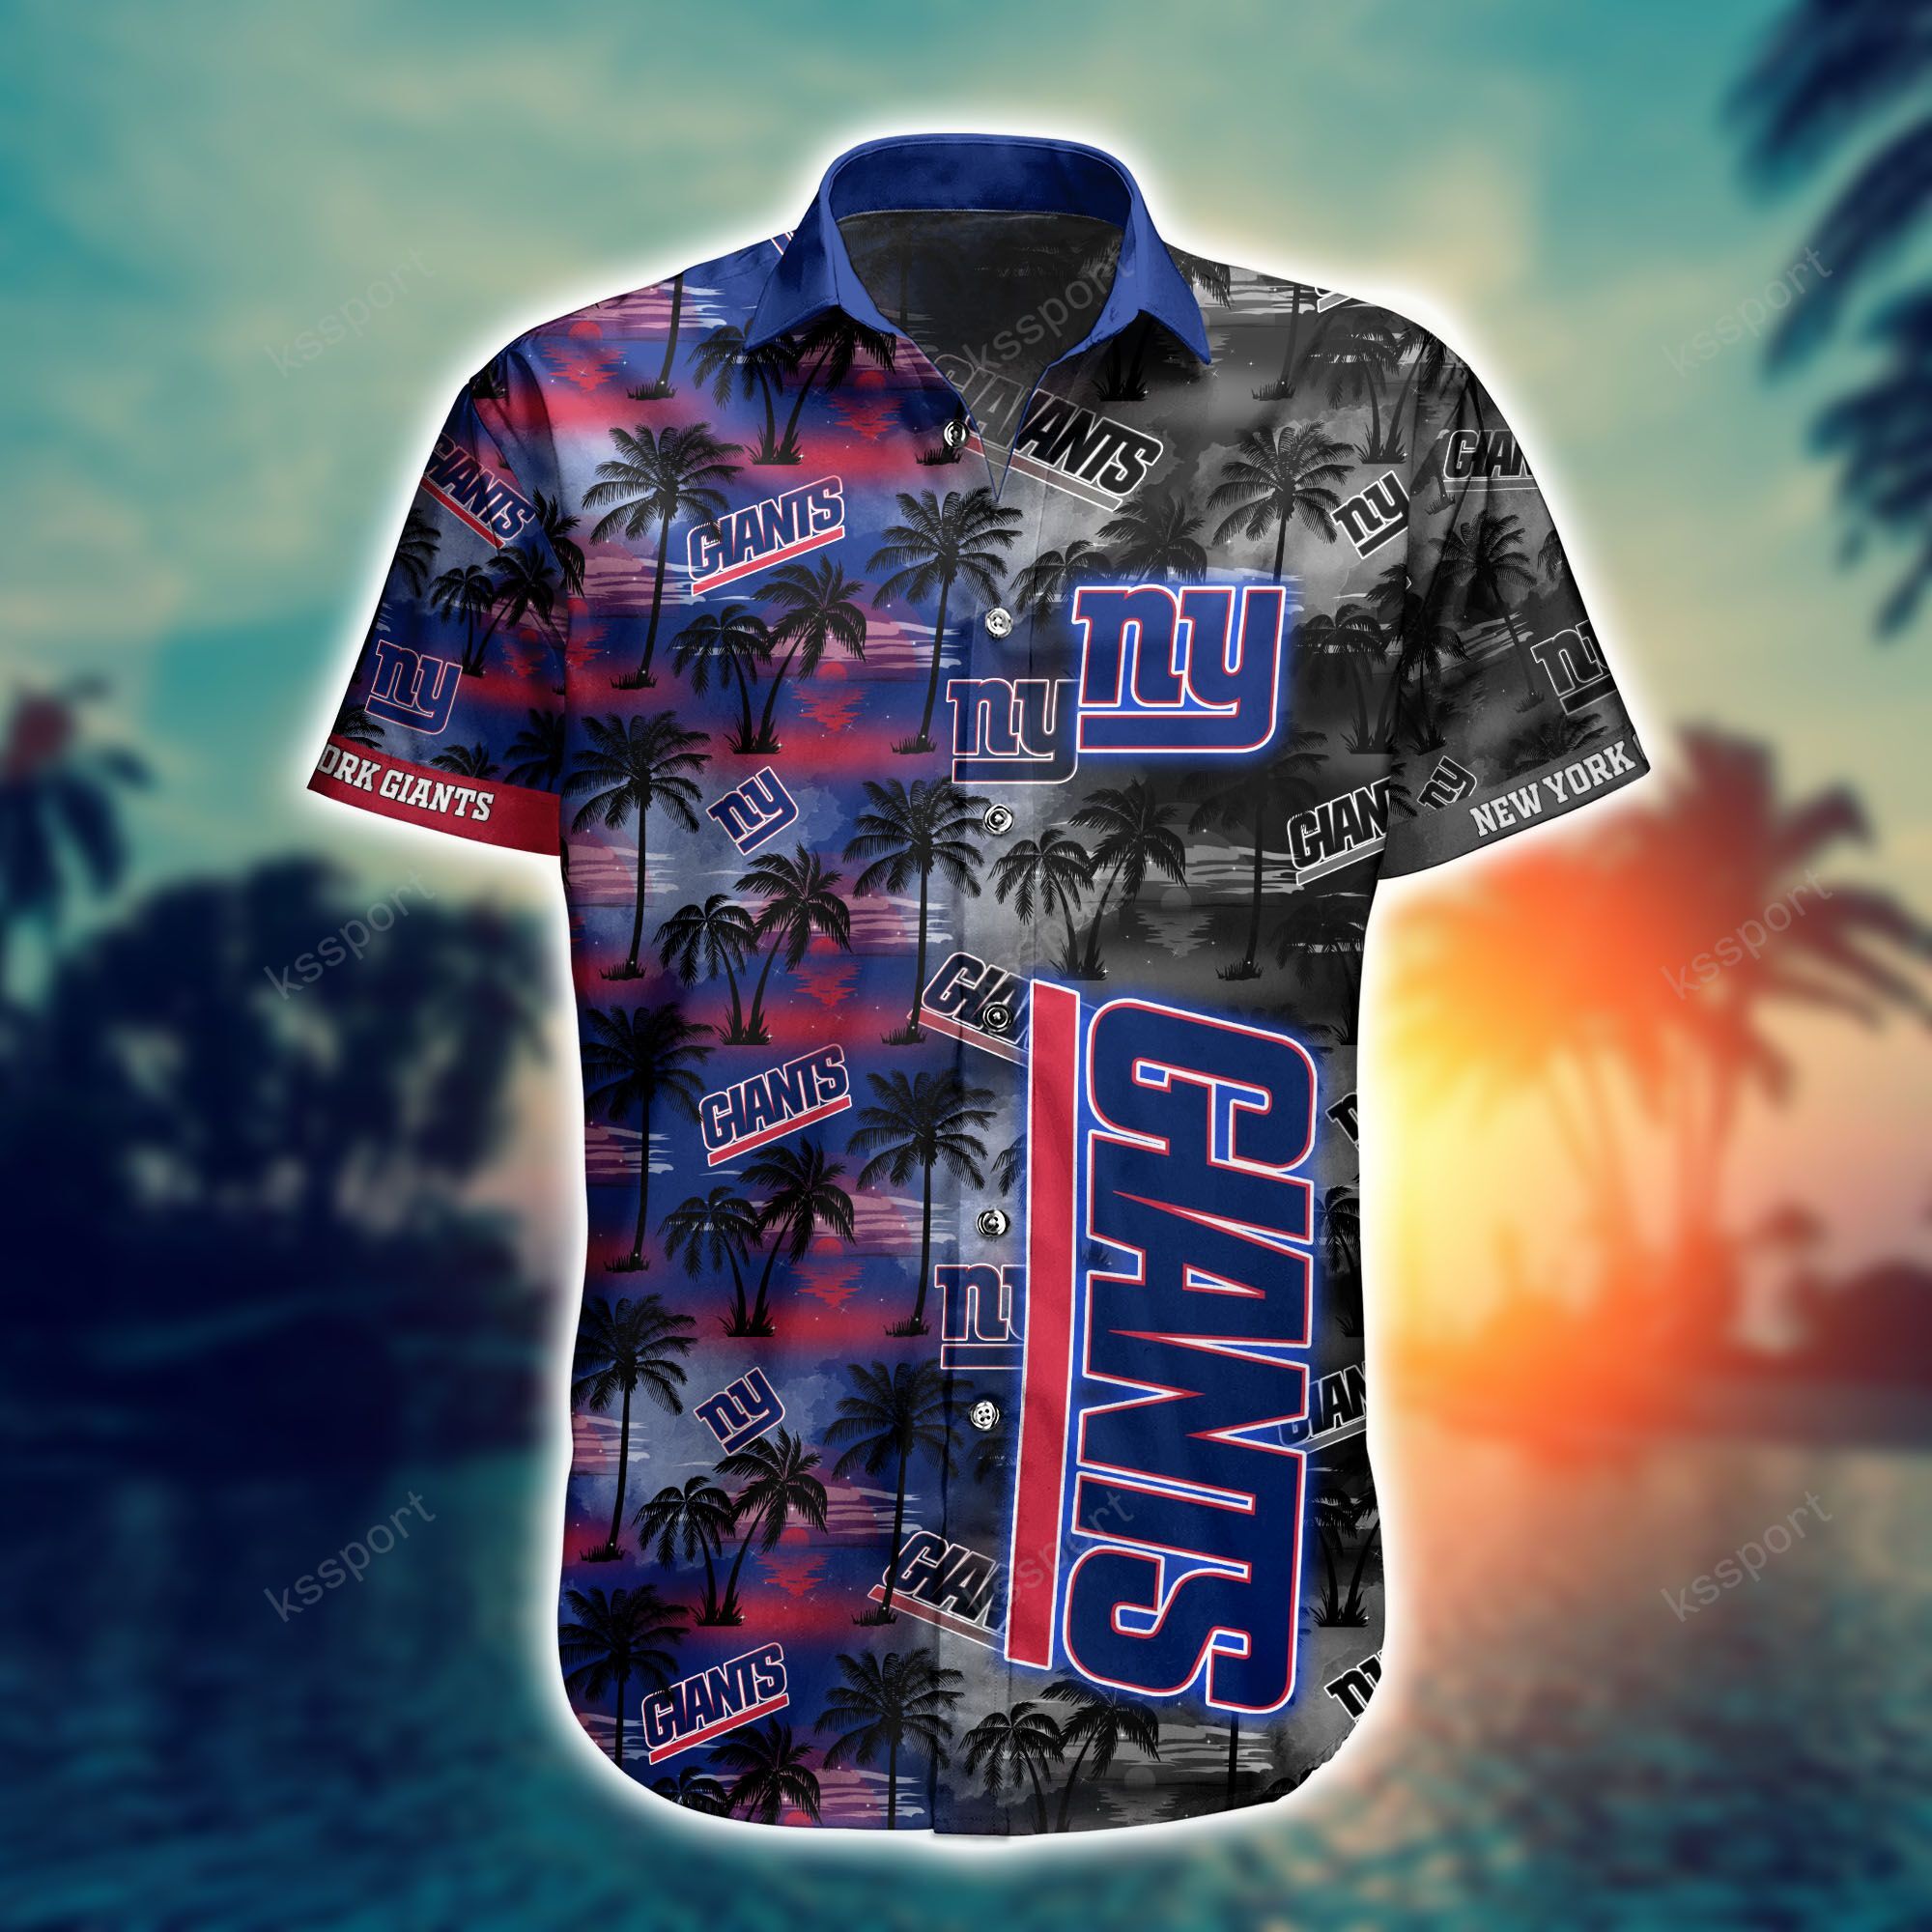 Top cool Hawaiian shirt 2022 - Make sure you get yours today before they run out! 218